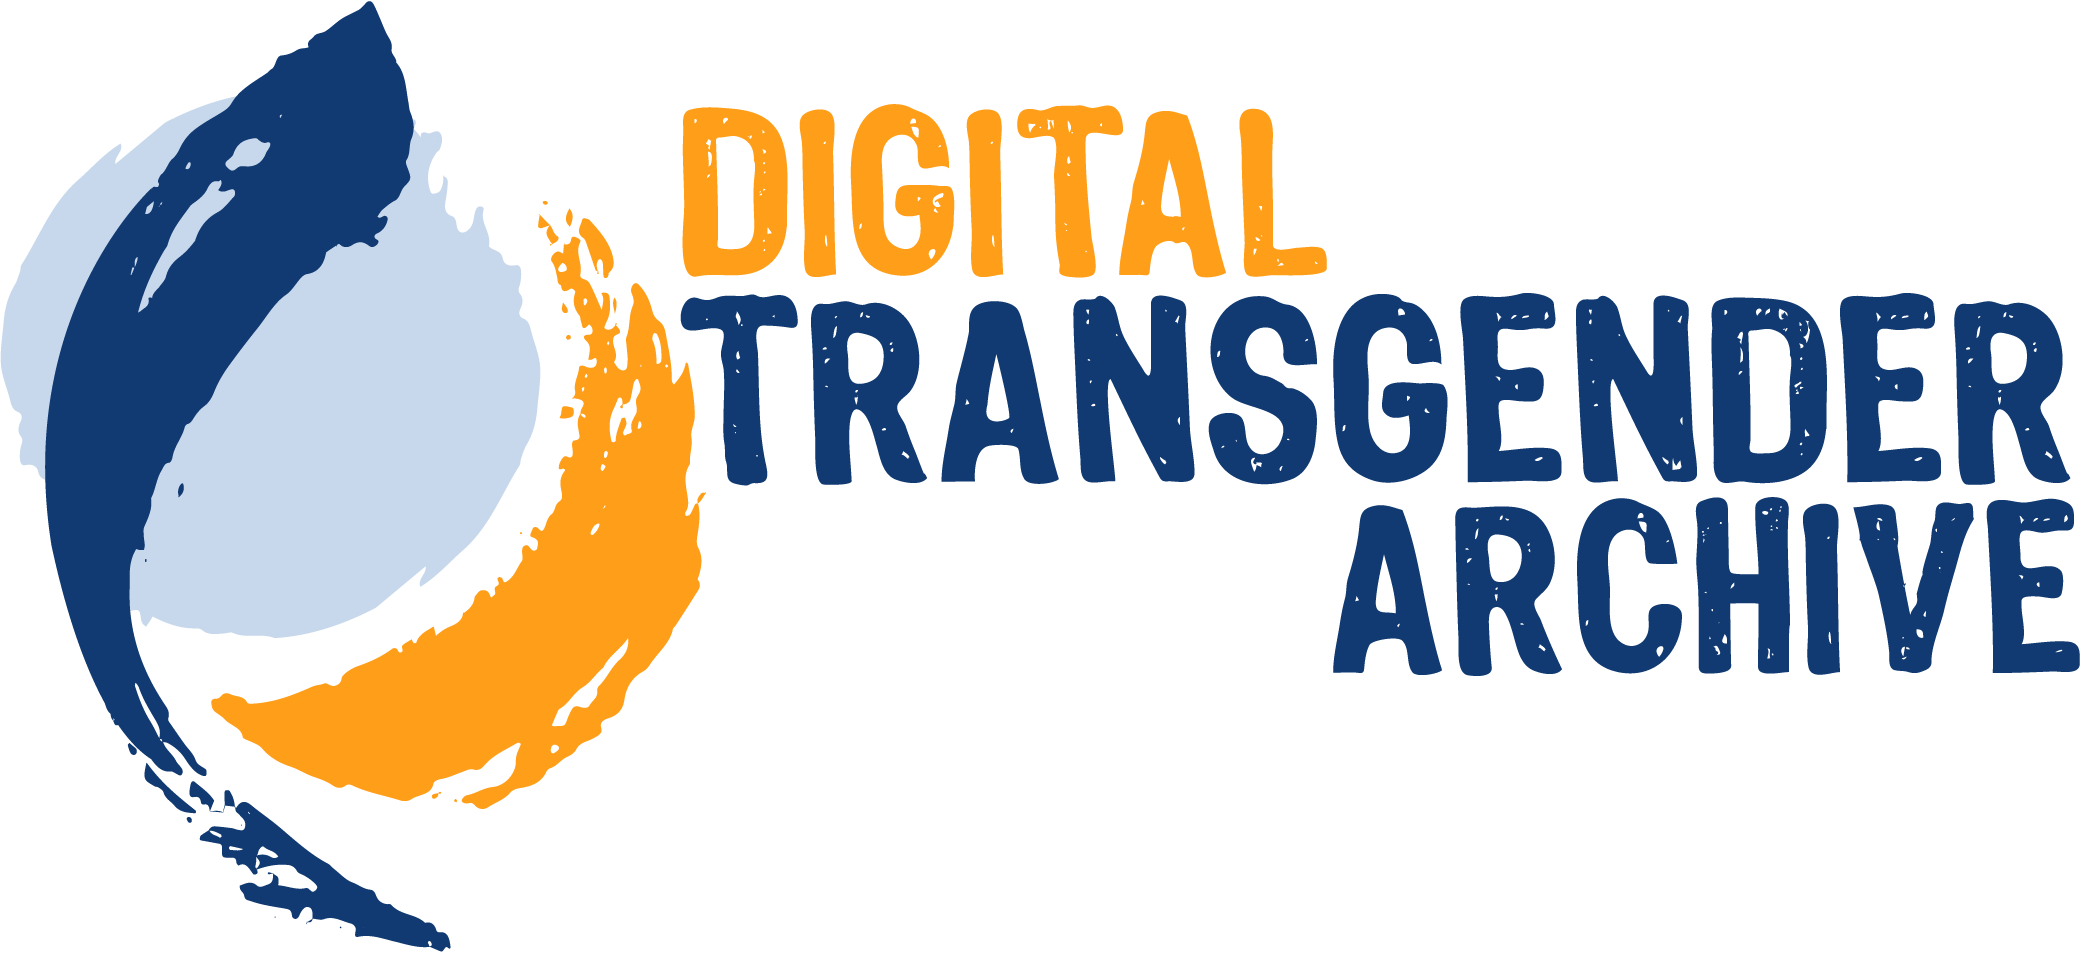 Logo for the Digital Transgender Archive, a light blue circle beneath a dark blue swoop and an orange brushstroke next to the circle